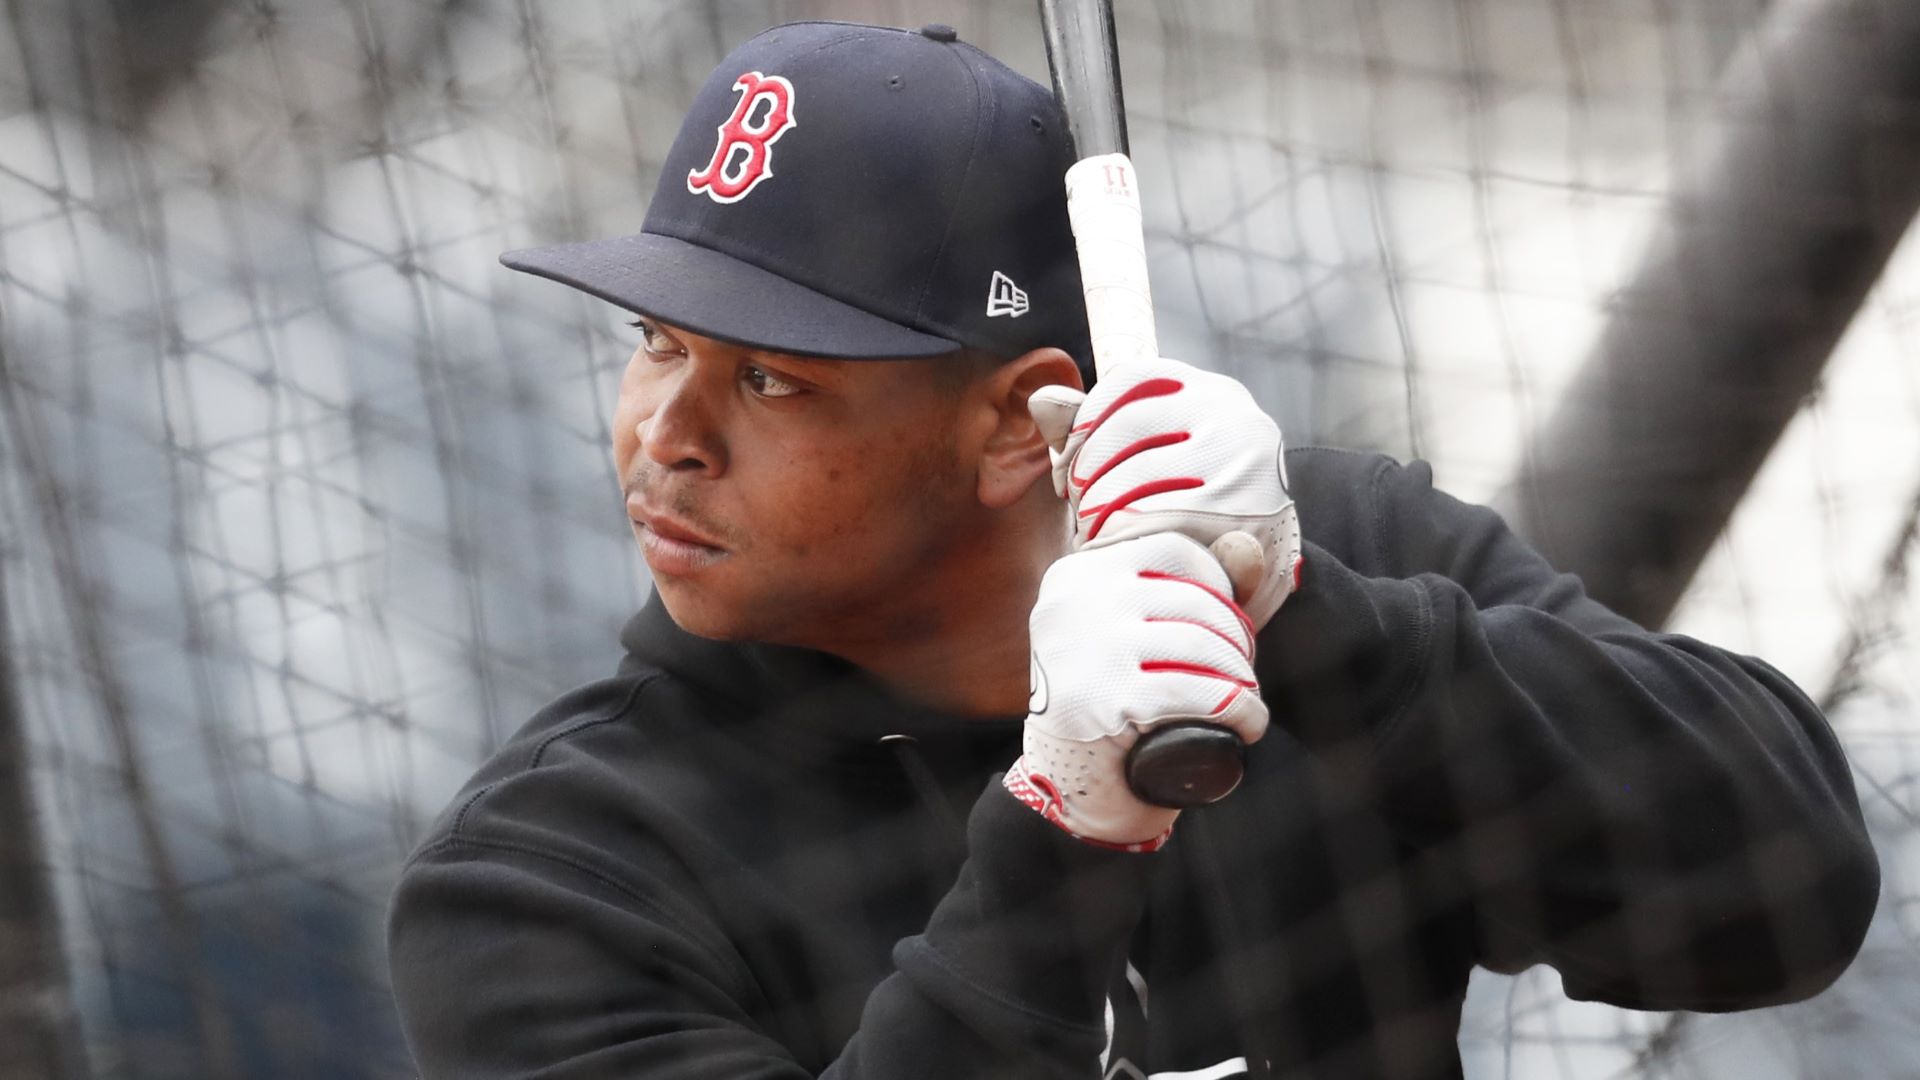 Red Sox Vs. Guardians Lineups: Rafael Devers Returns After Five-Game
Absence